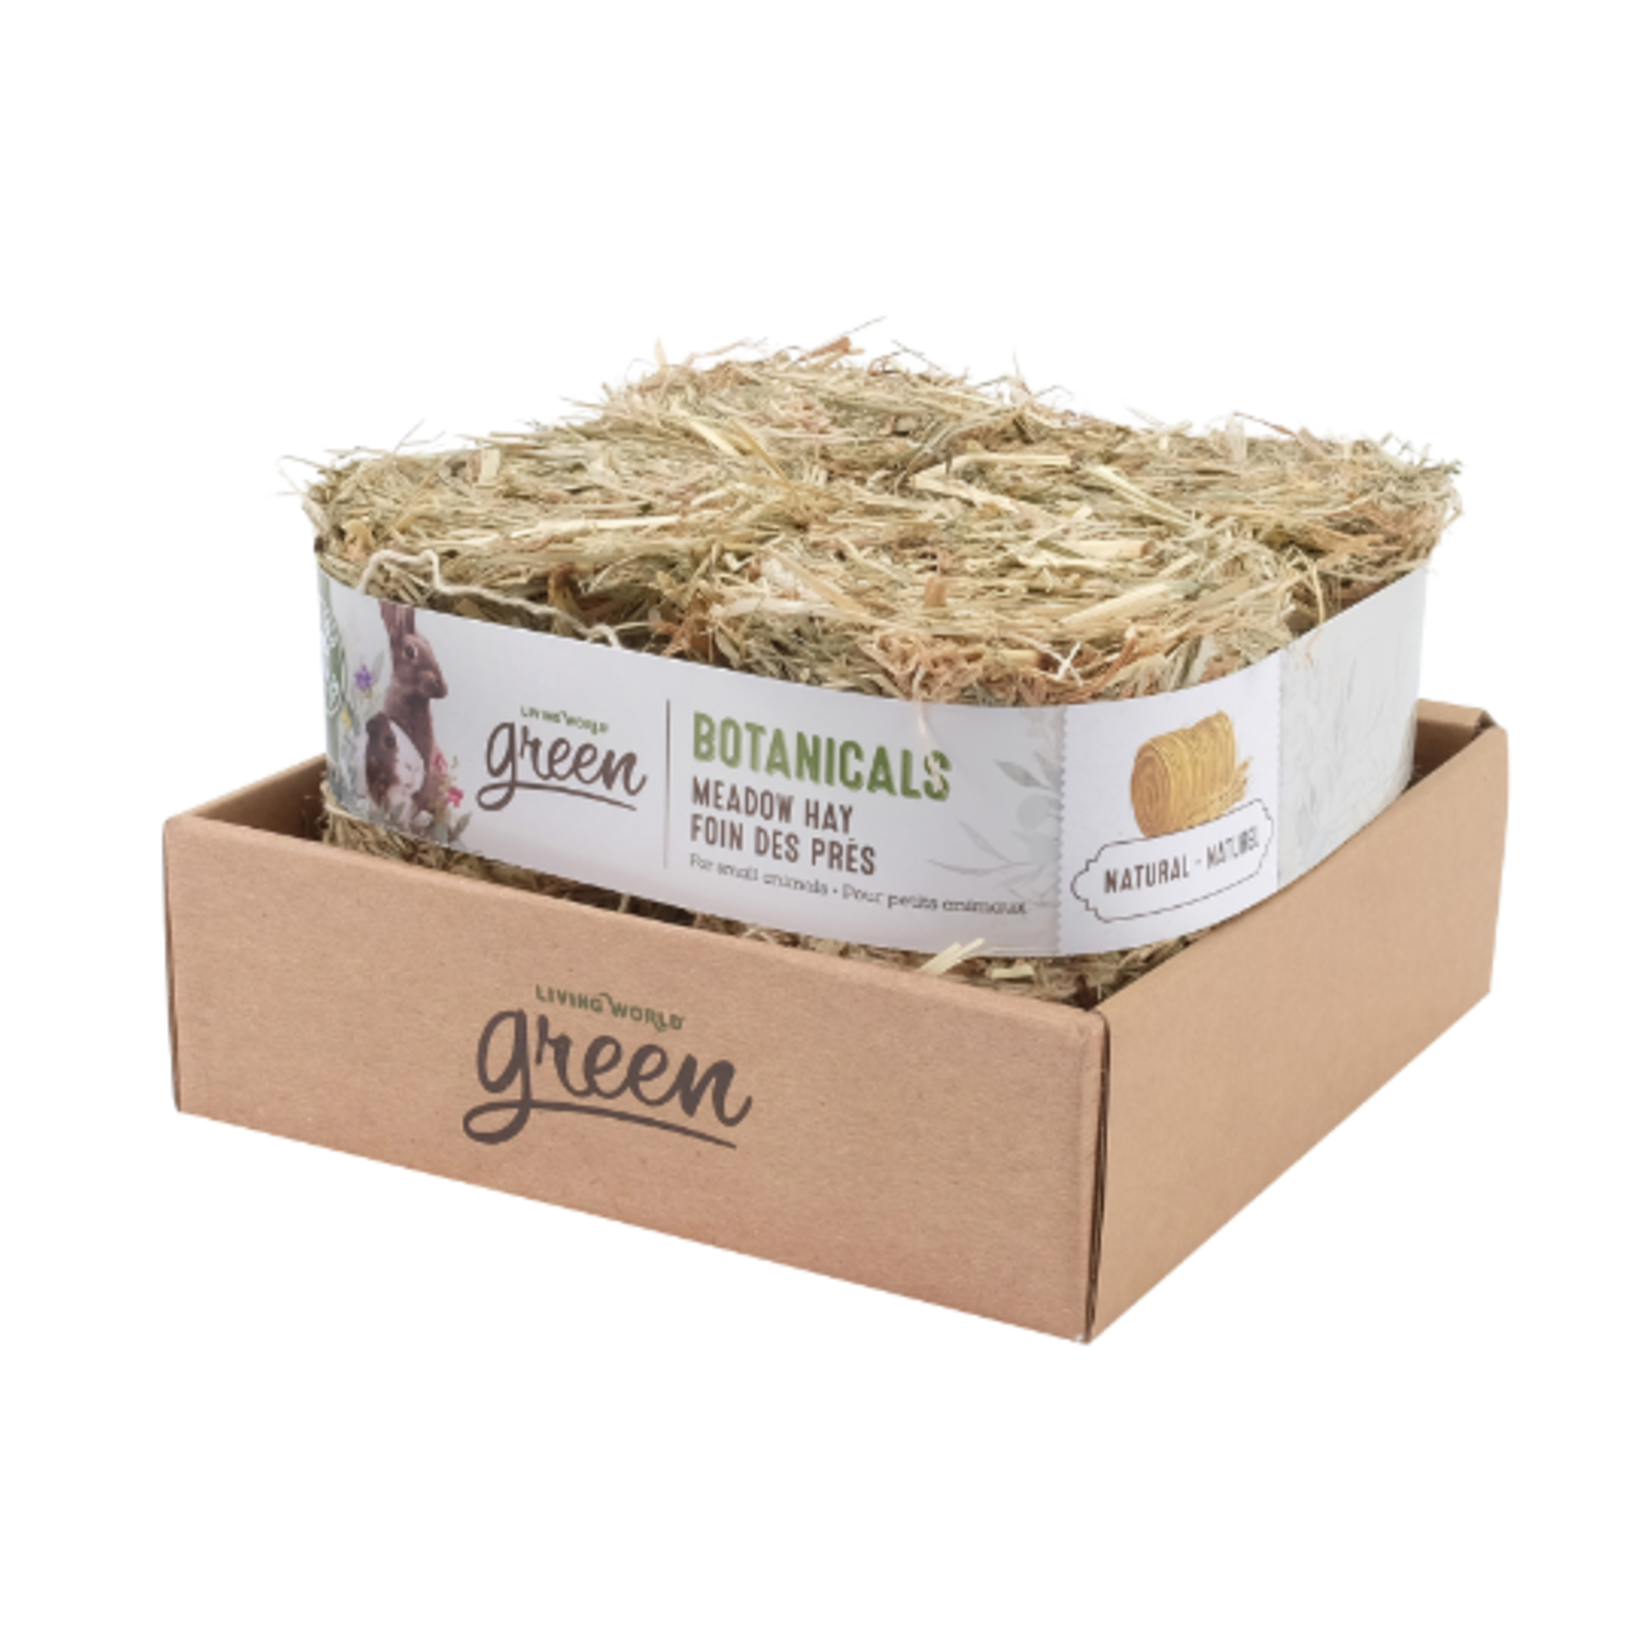 Living World Green Botanicals - Meadow Hay Bale - Natural - Pack of 4 - 150 g each